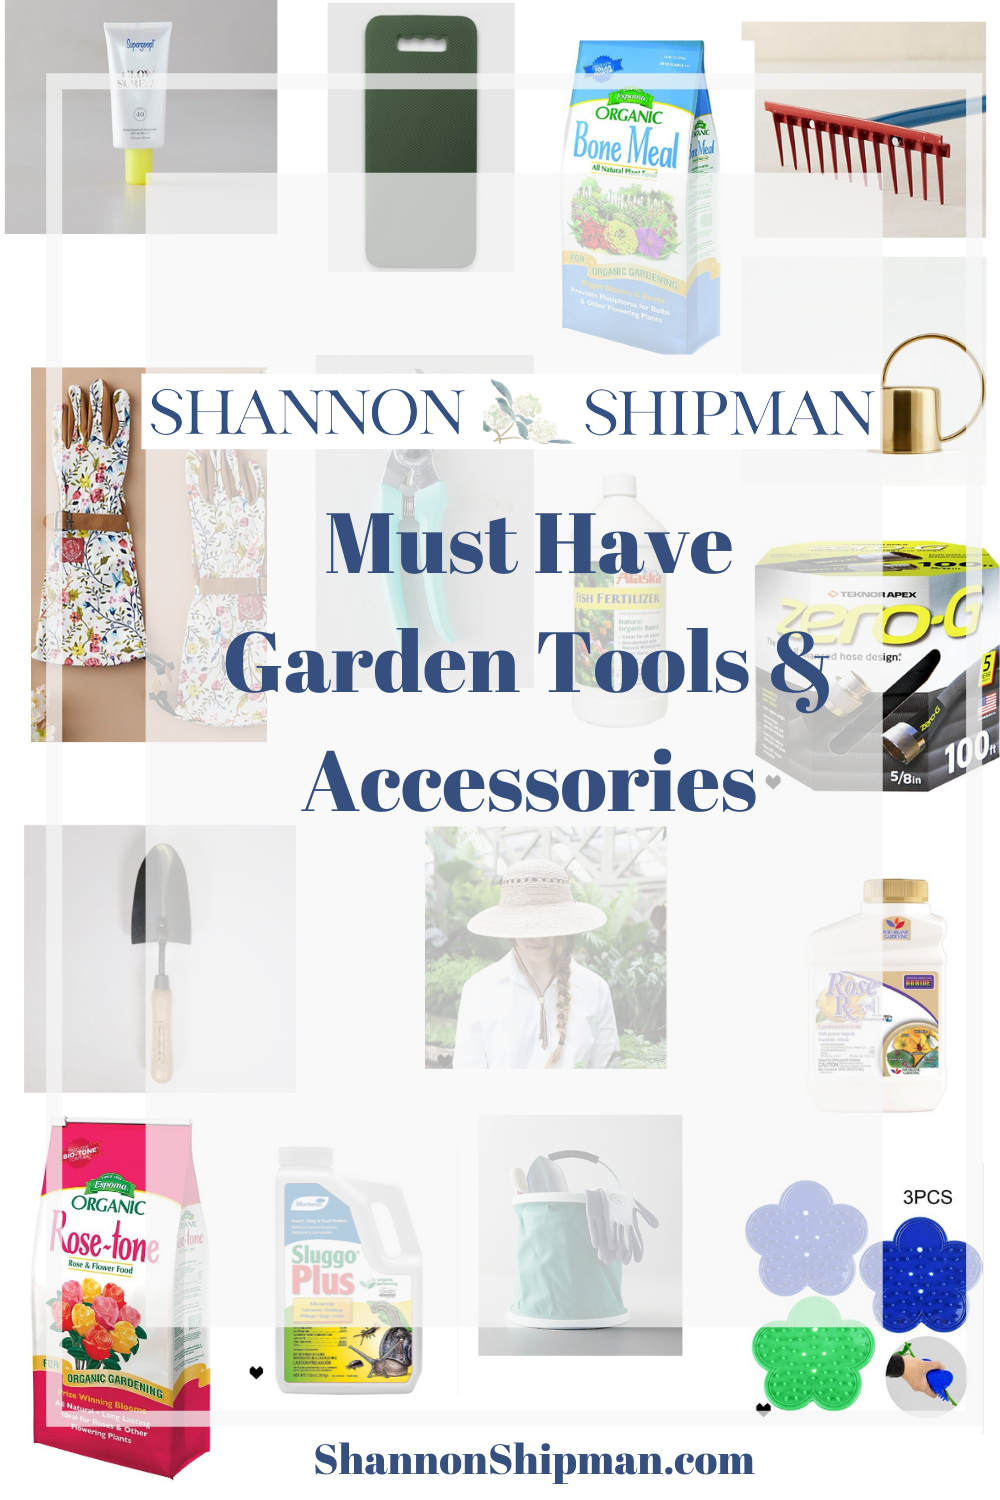 Garden Tools List by popular New England blogger, Shannon Shipman: Pinterest image must-have garden tools and accessories. 